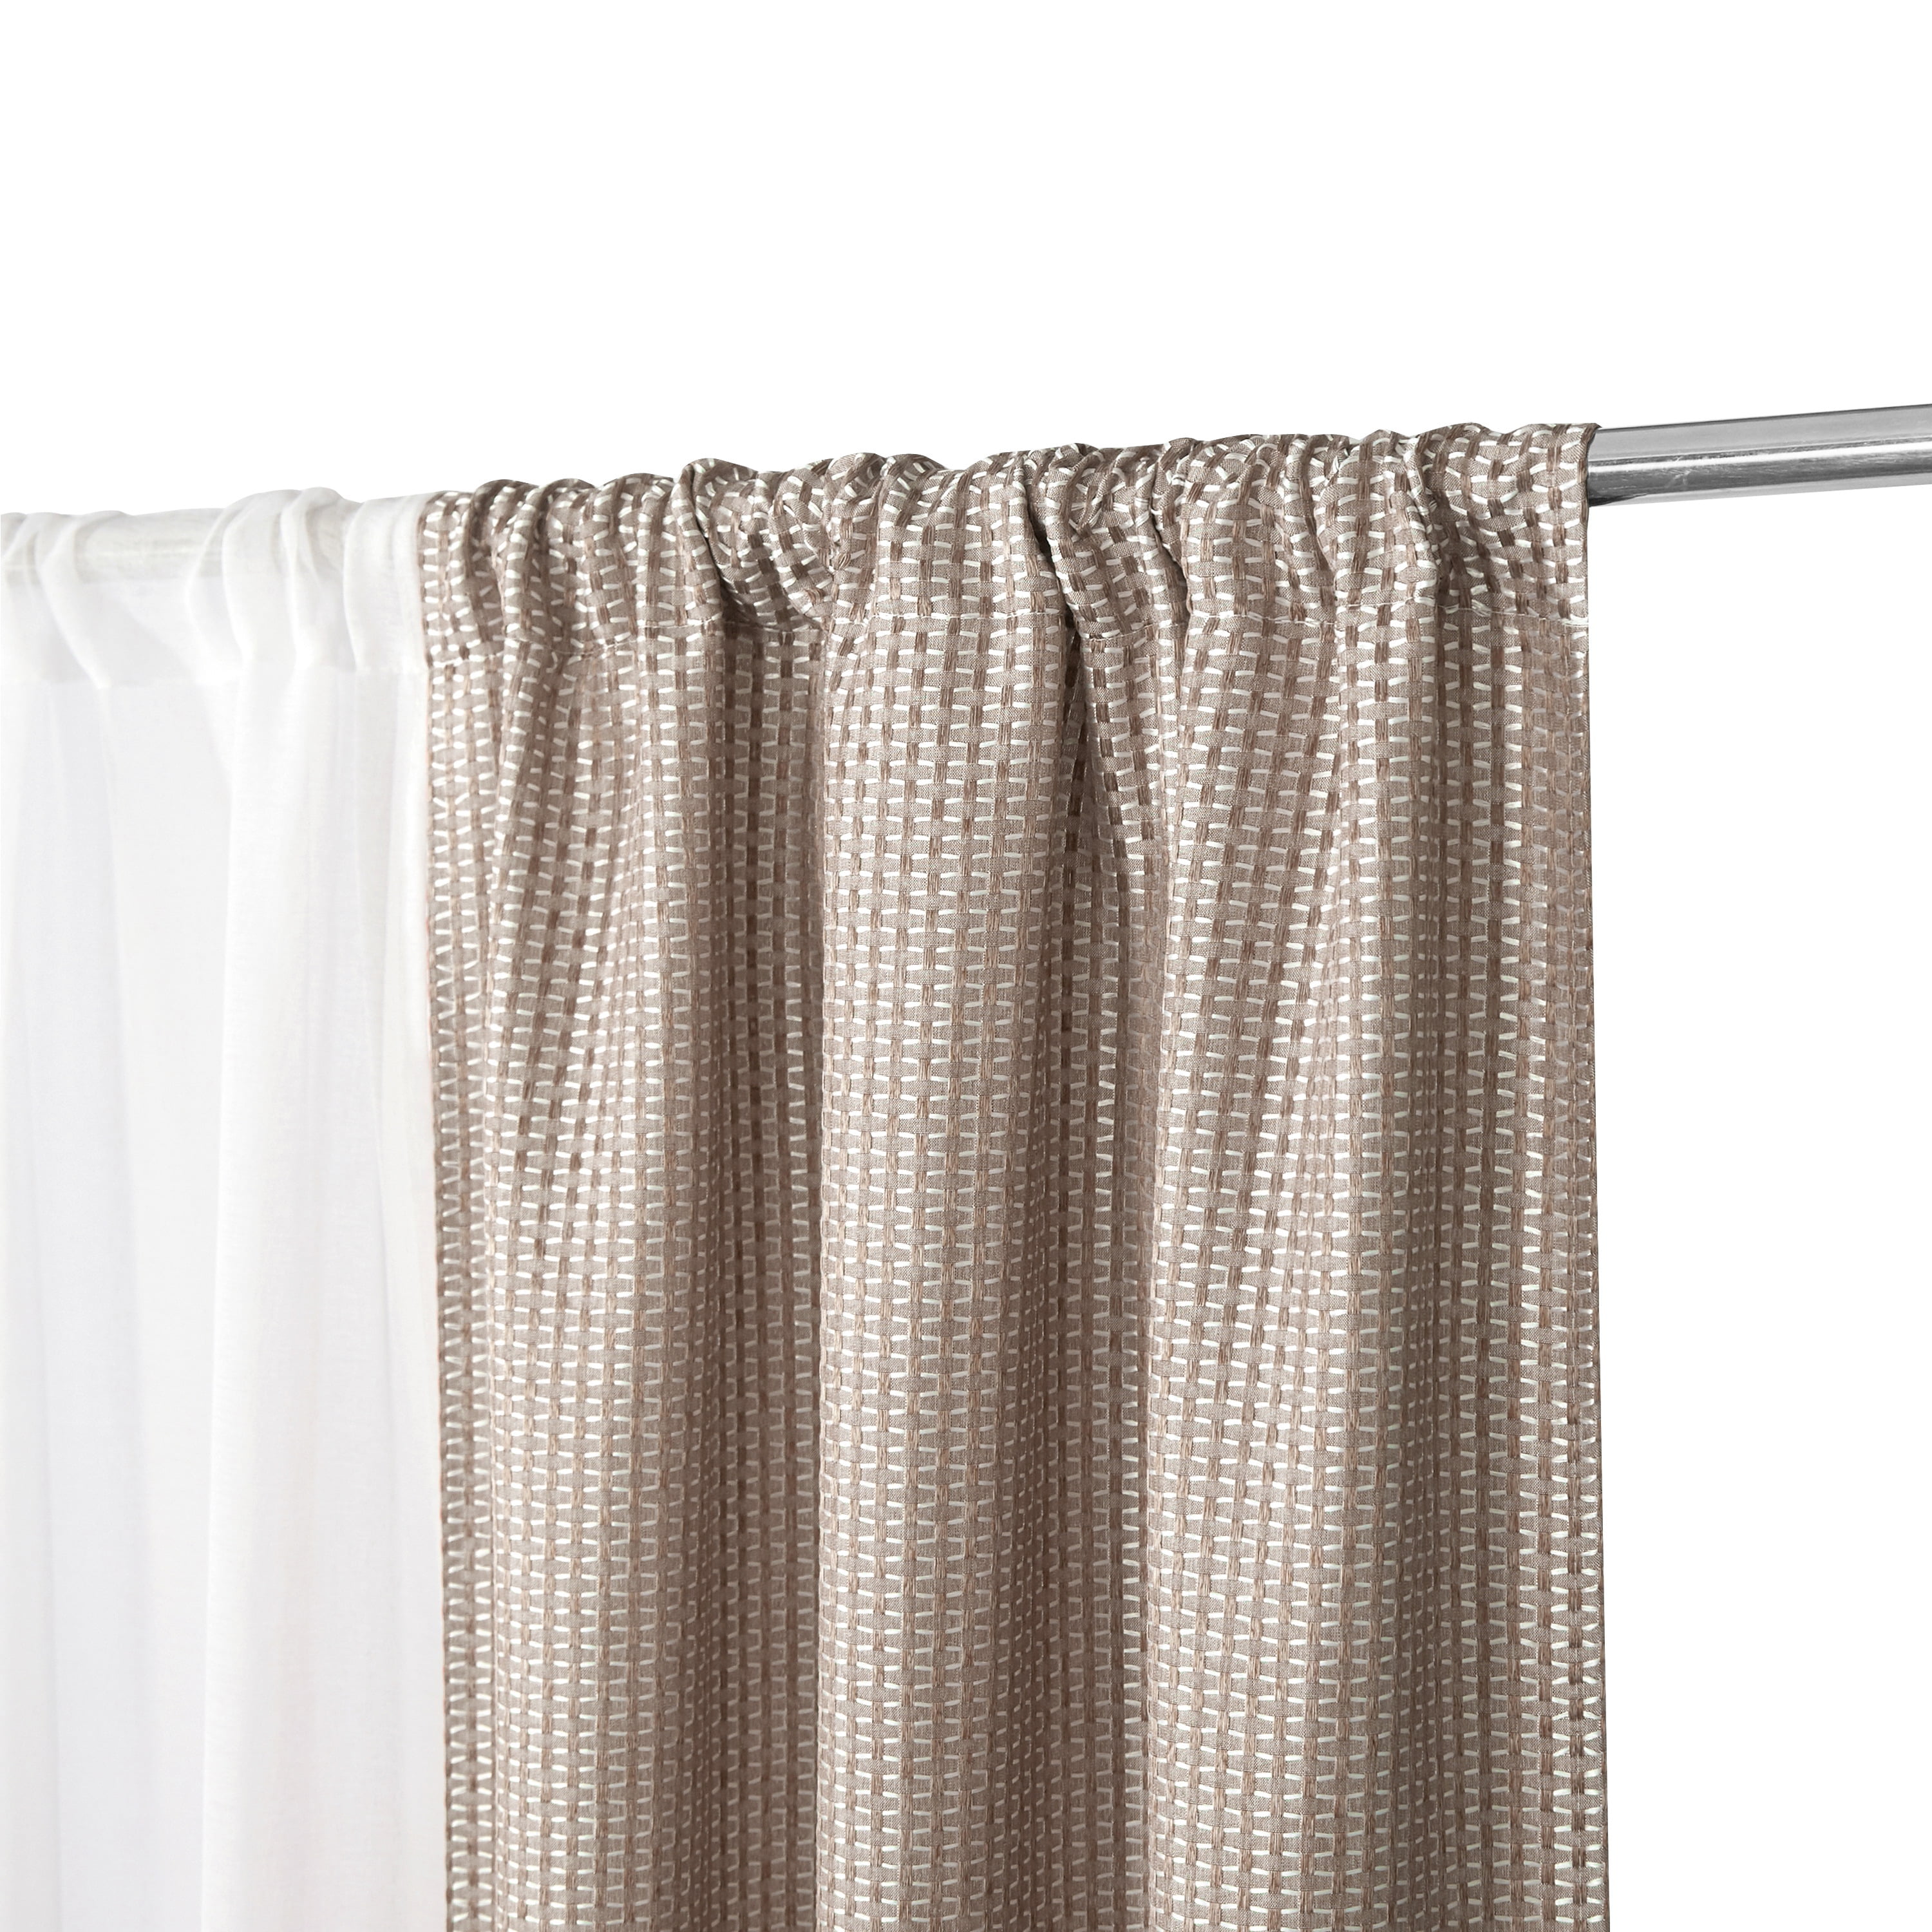 Gardens & Panel 74x63 Solid & Taupe, Piece Sheer Curtain Better Stitch 4 & Homes Taupe Set, Open